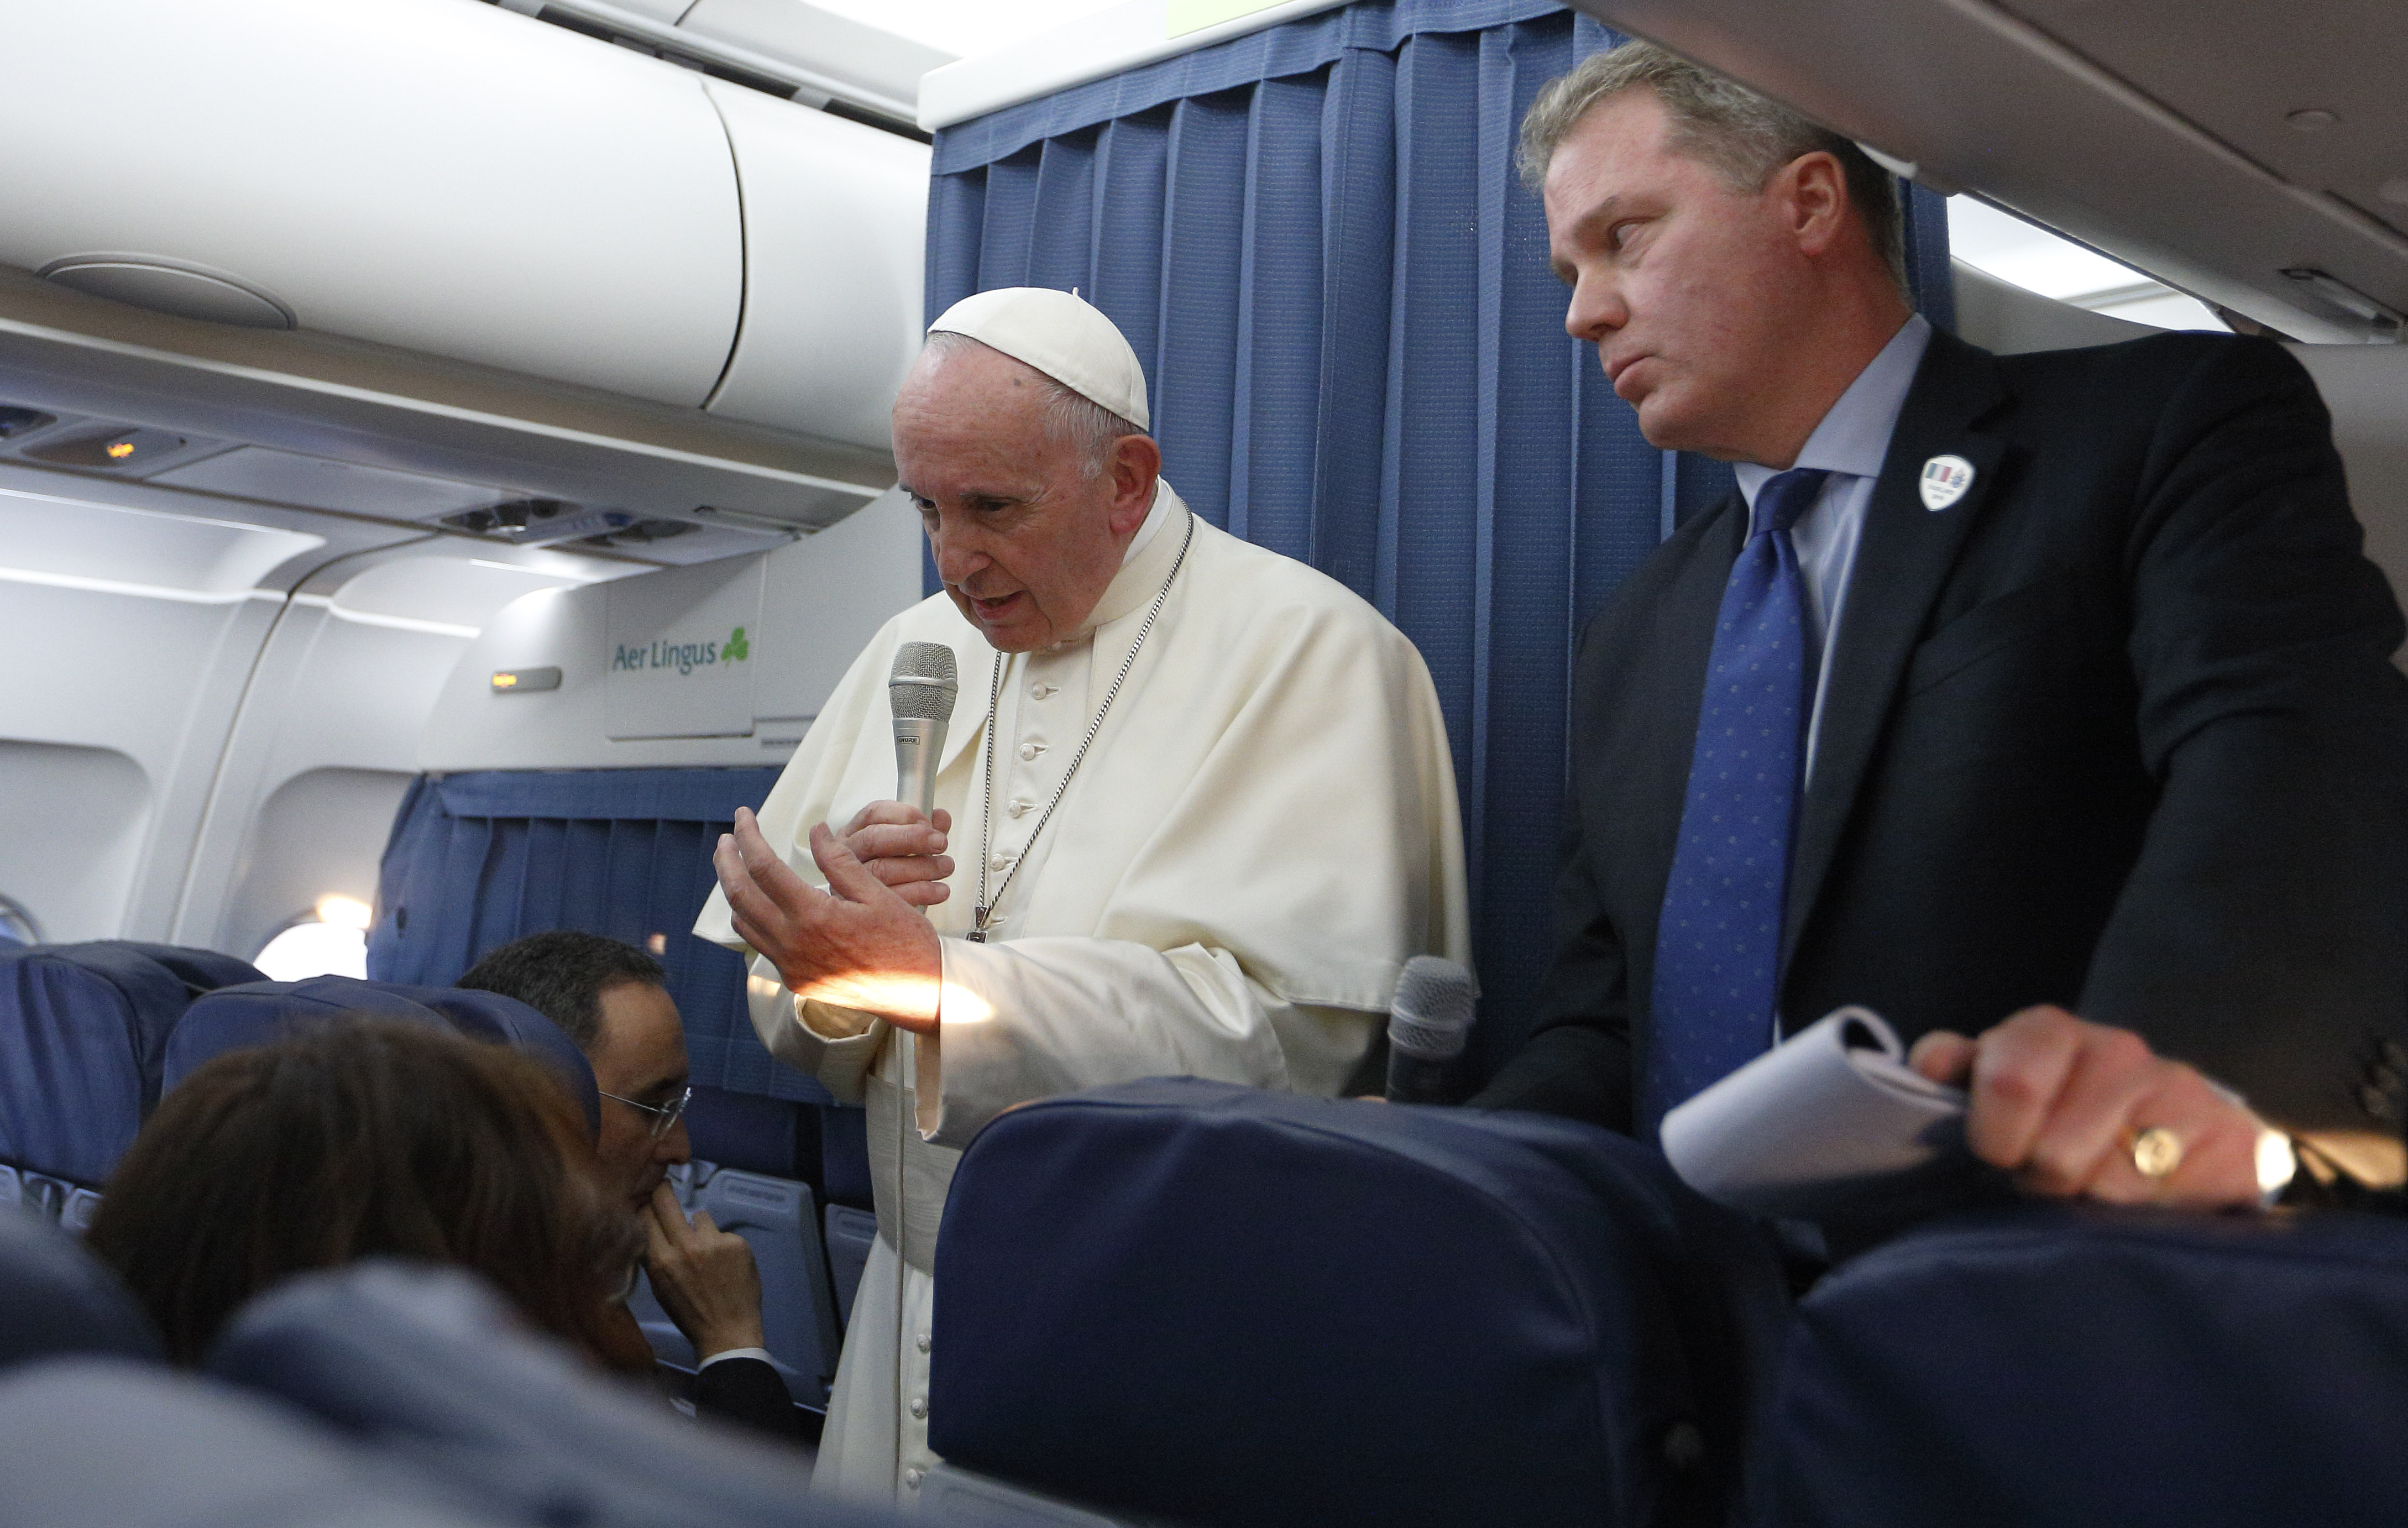 Image result for pope francis plane dublin 2018